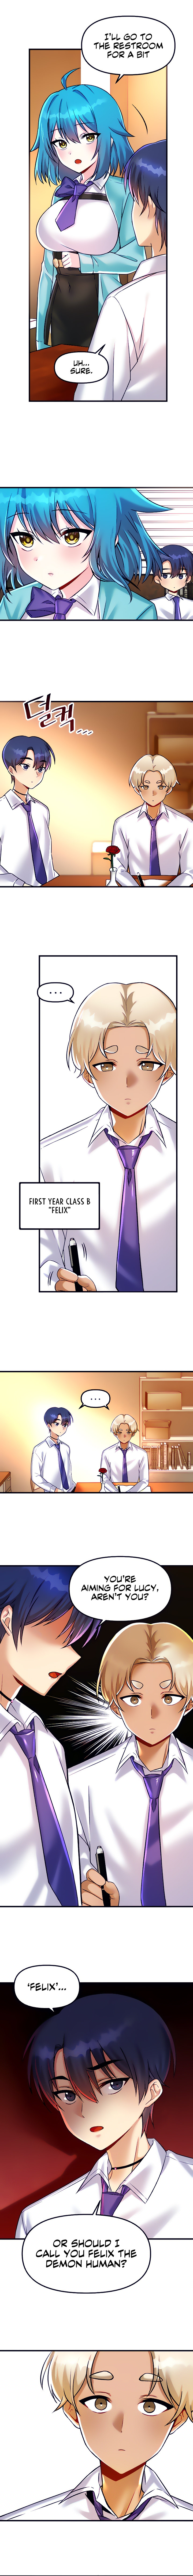 Trapped in the Academy’s Eroge - Chapter 23 Page 2